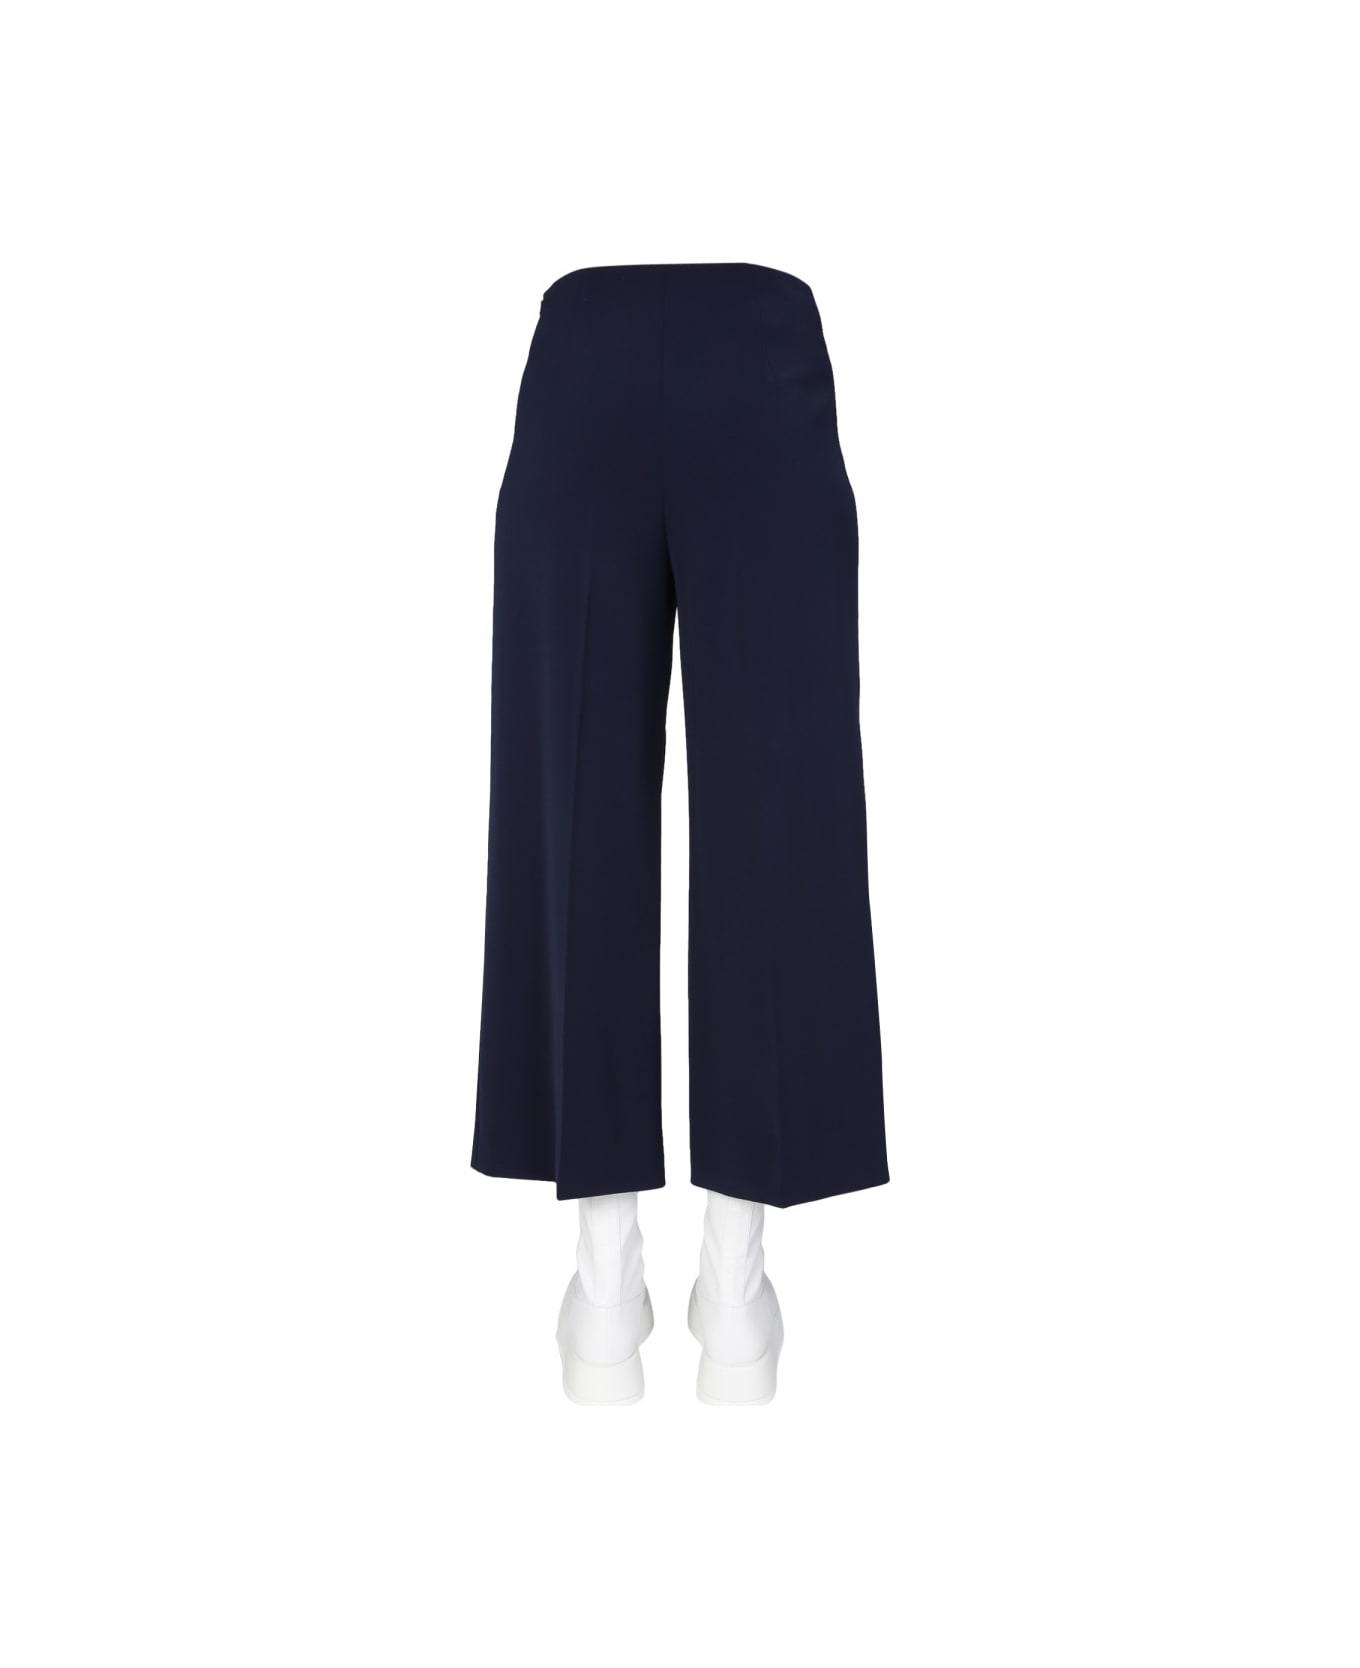 Boutique Moschino Wide Leg Trousers - BLUE